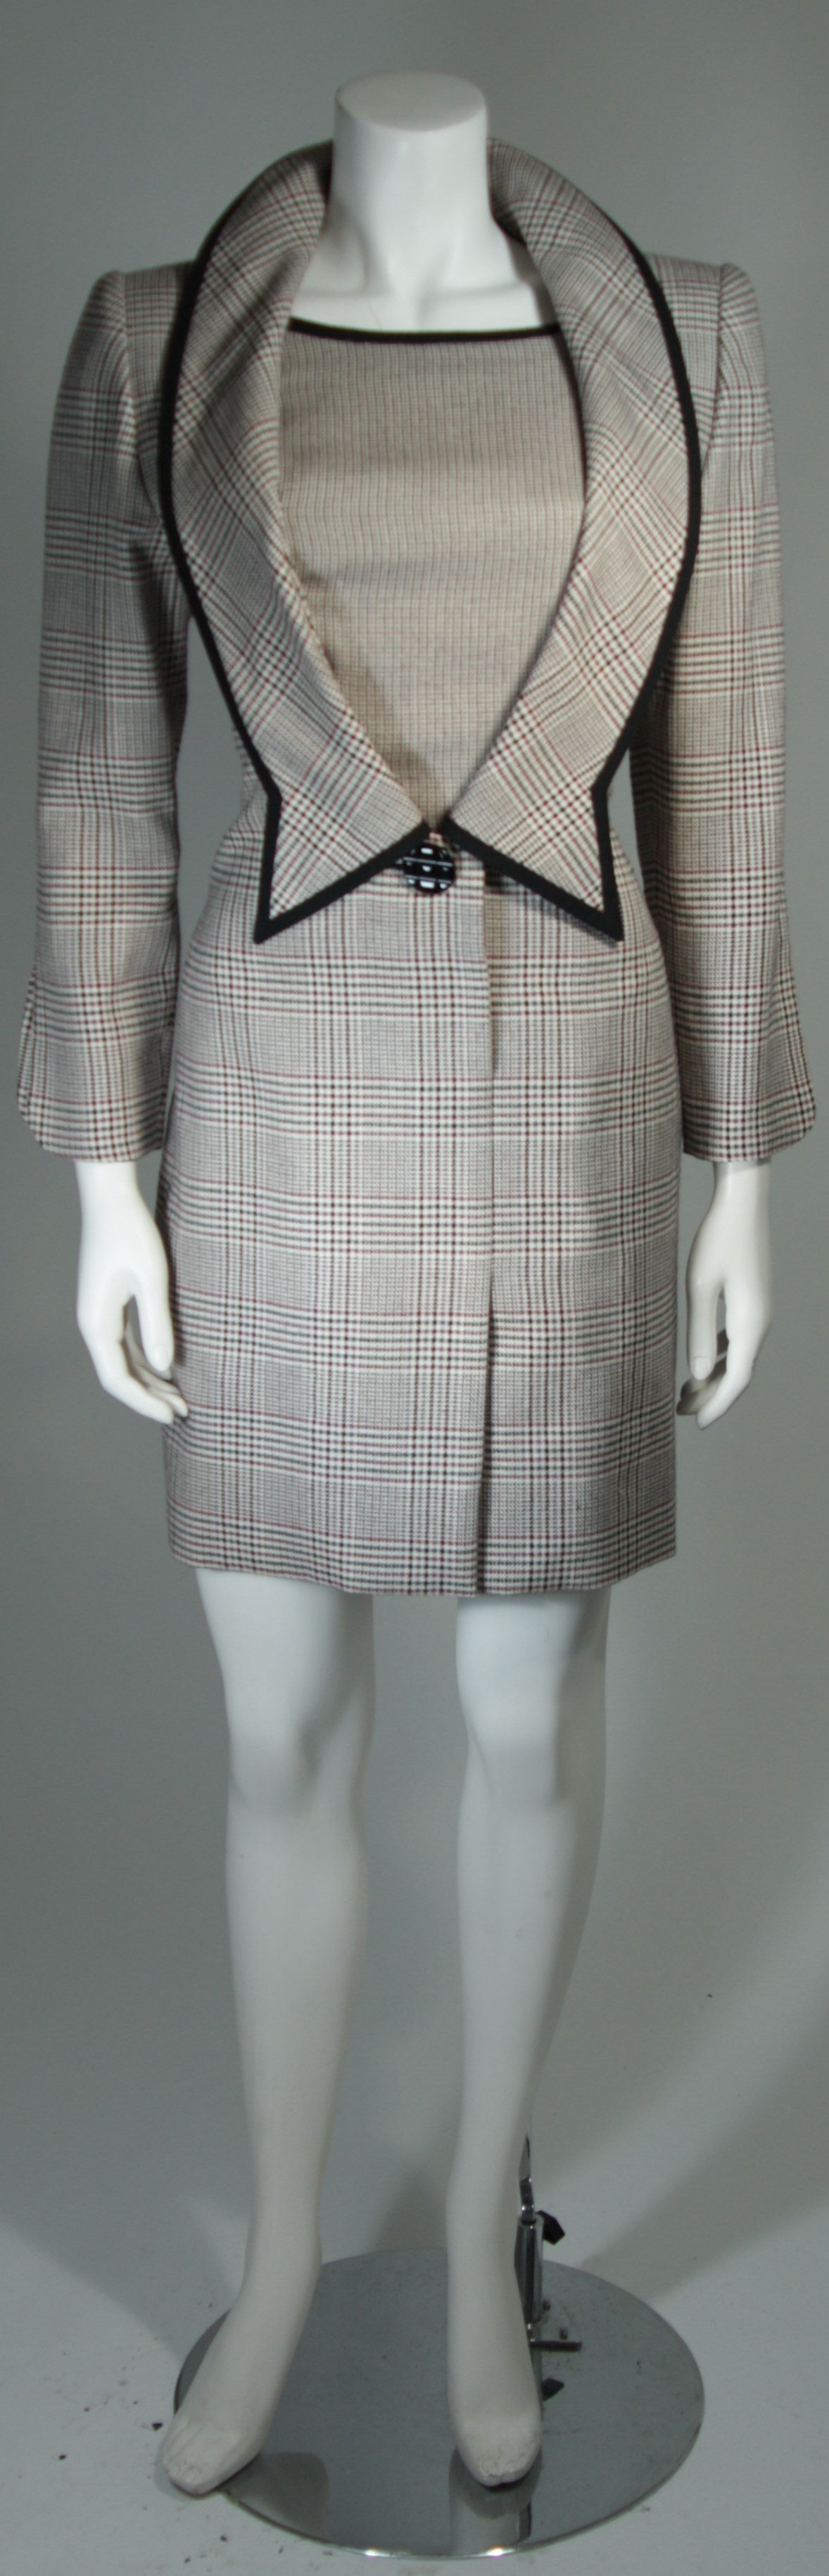 This Galanos Couture dress is composed of a houndstooth patterned wool in hues of maroon, grey, and cream. The coat style dress features center front snap closures and side pockets. In excellent condition.

This is a piece from the personal